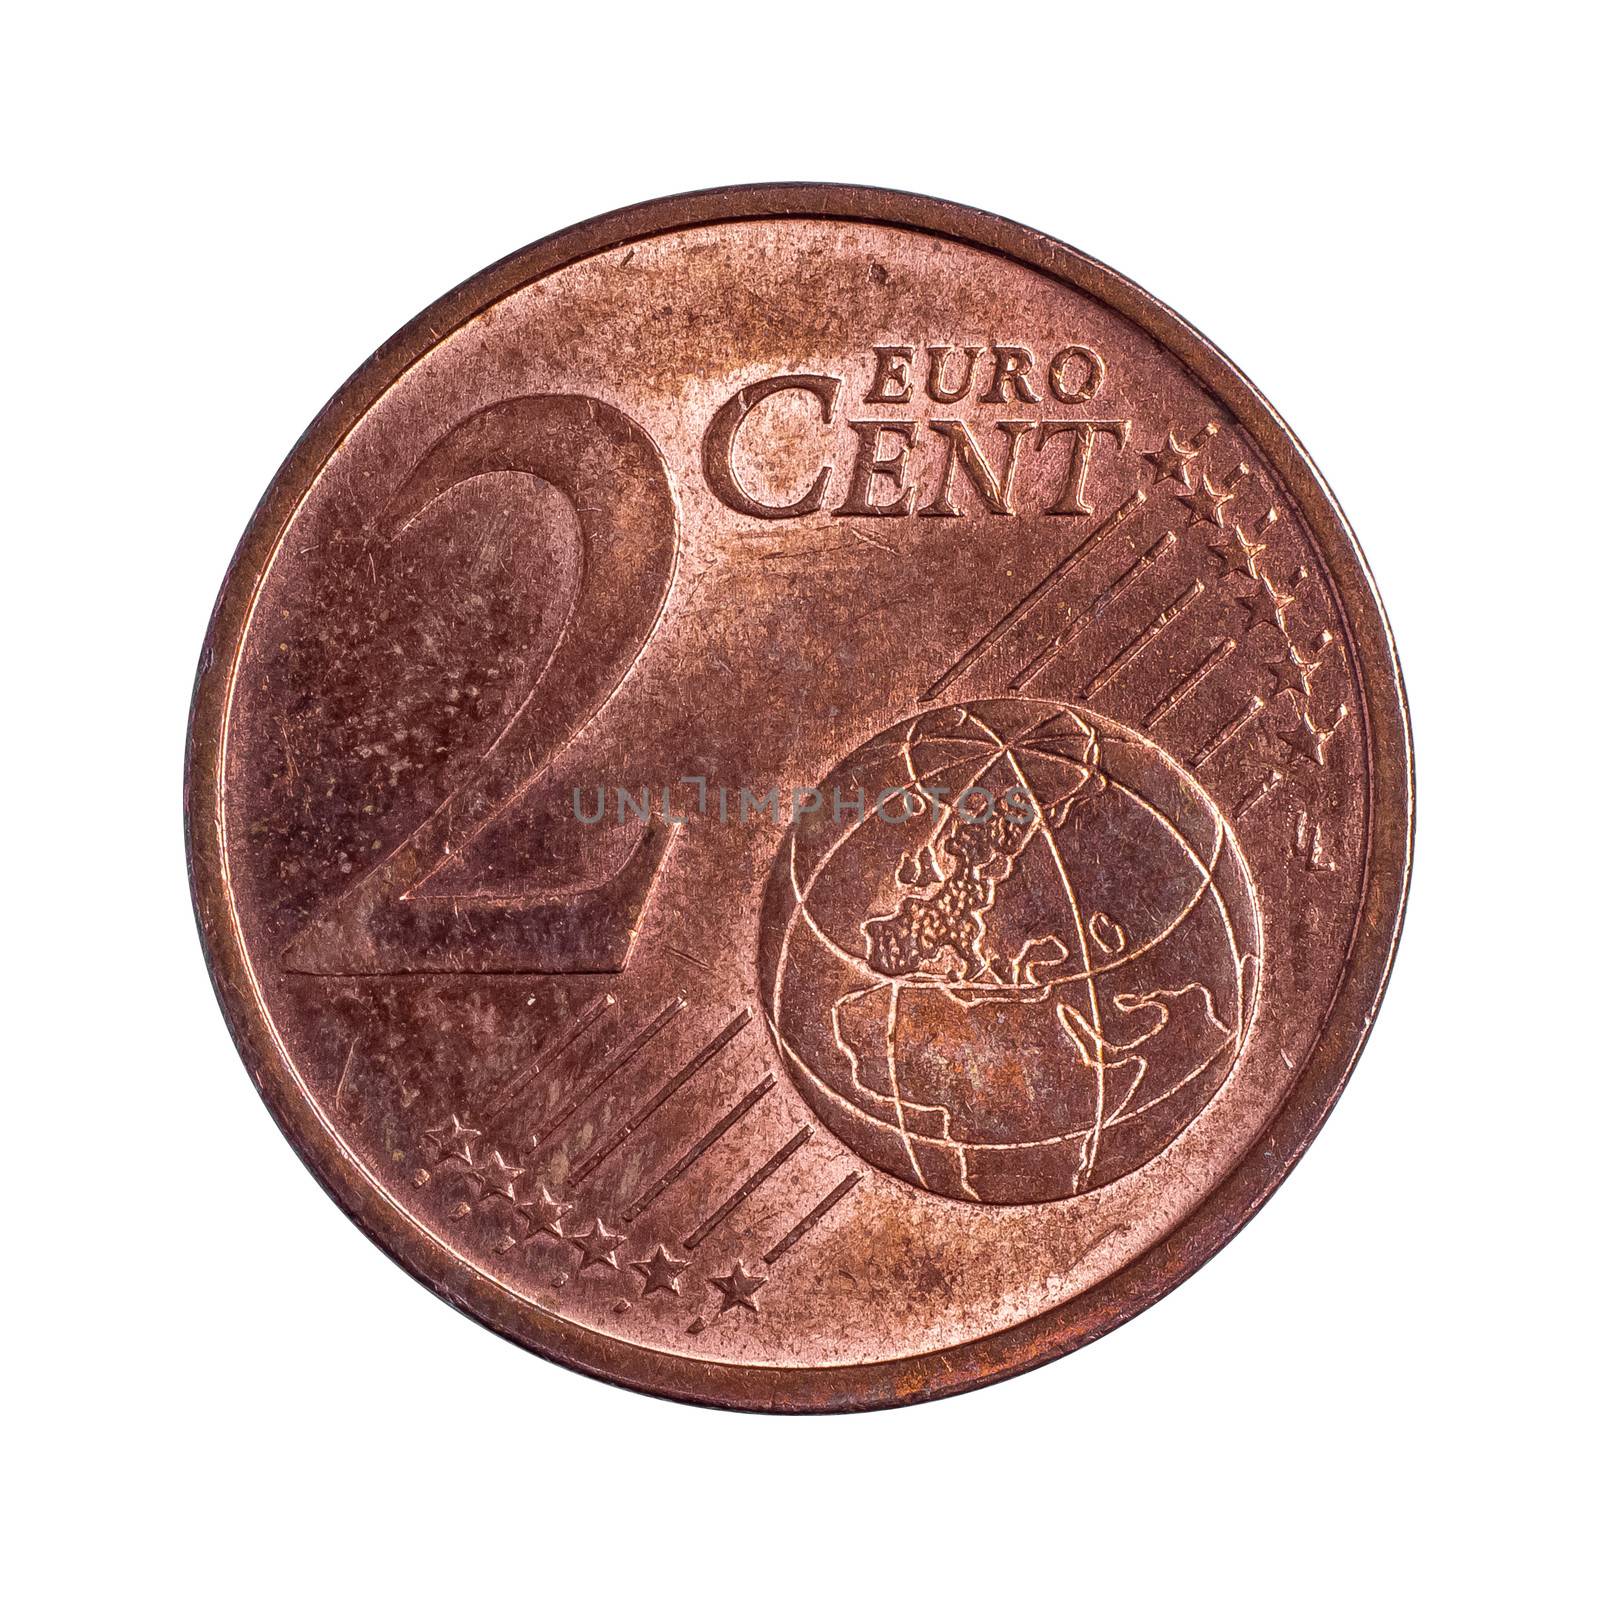 Two euro cents by dynamicfoto